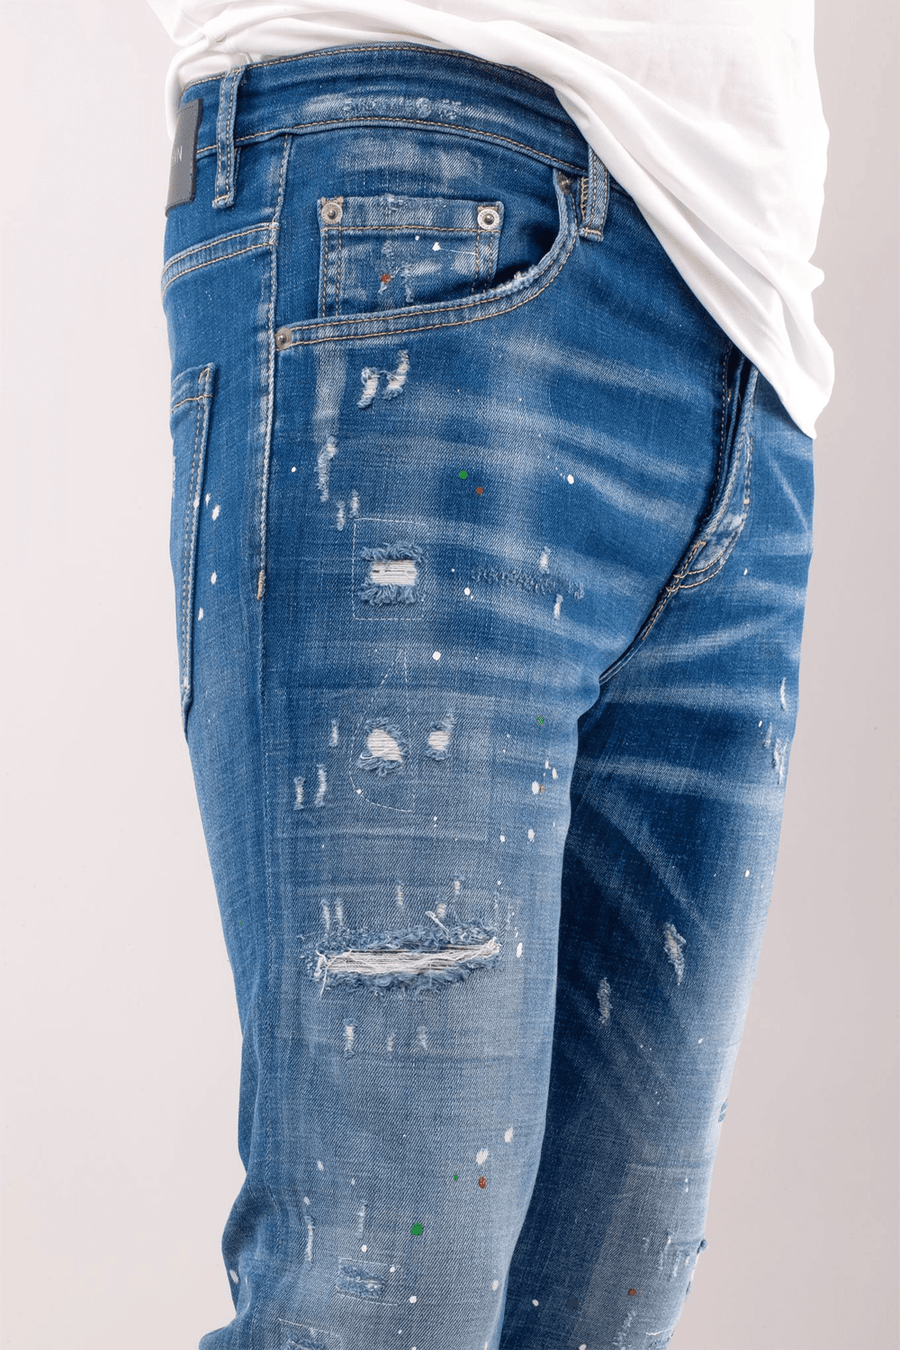 Buy the 7TH HVN S-2493 Jean in Blue at Intro. Spend £50 for free UK delivery. Official stockists. We ship worldwide.